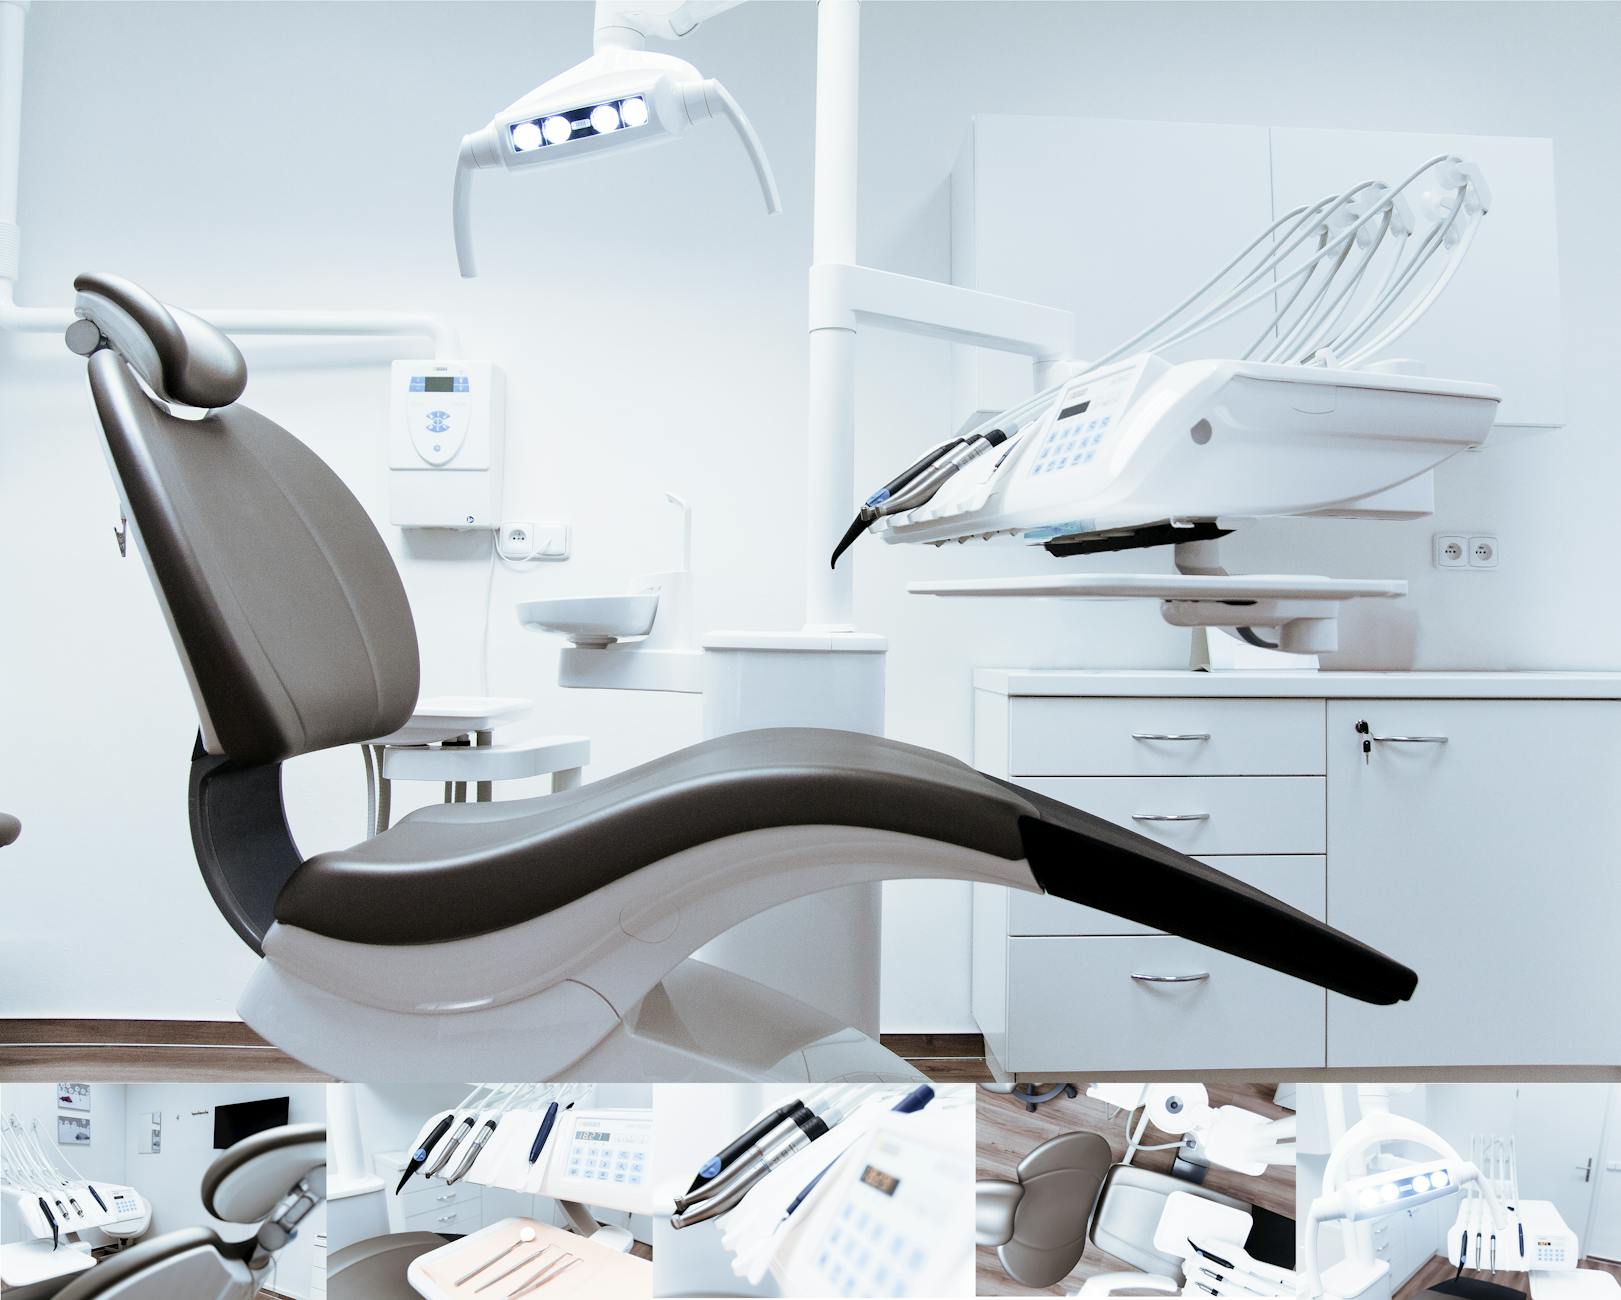 Biting Budgets: Re-Negotiating Your Dental Office Lease